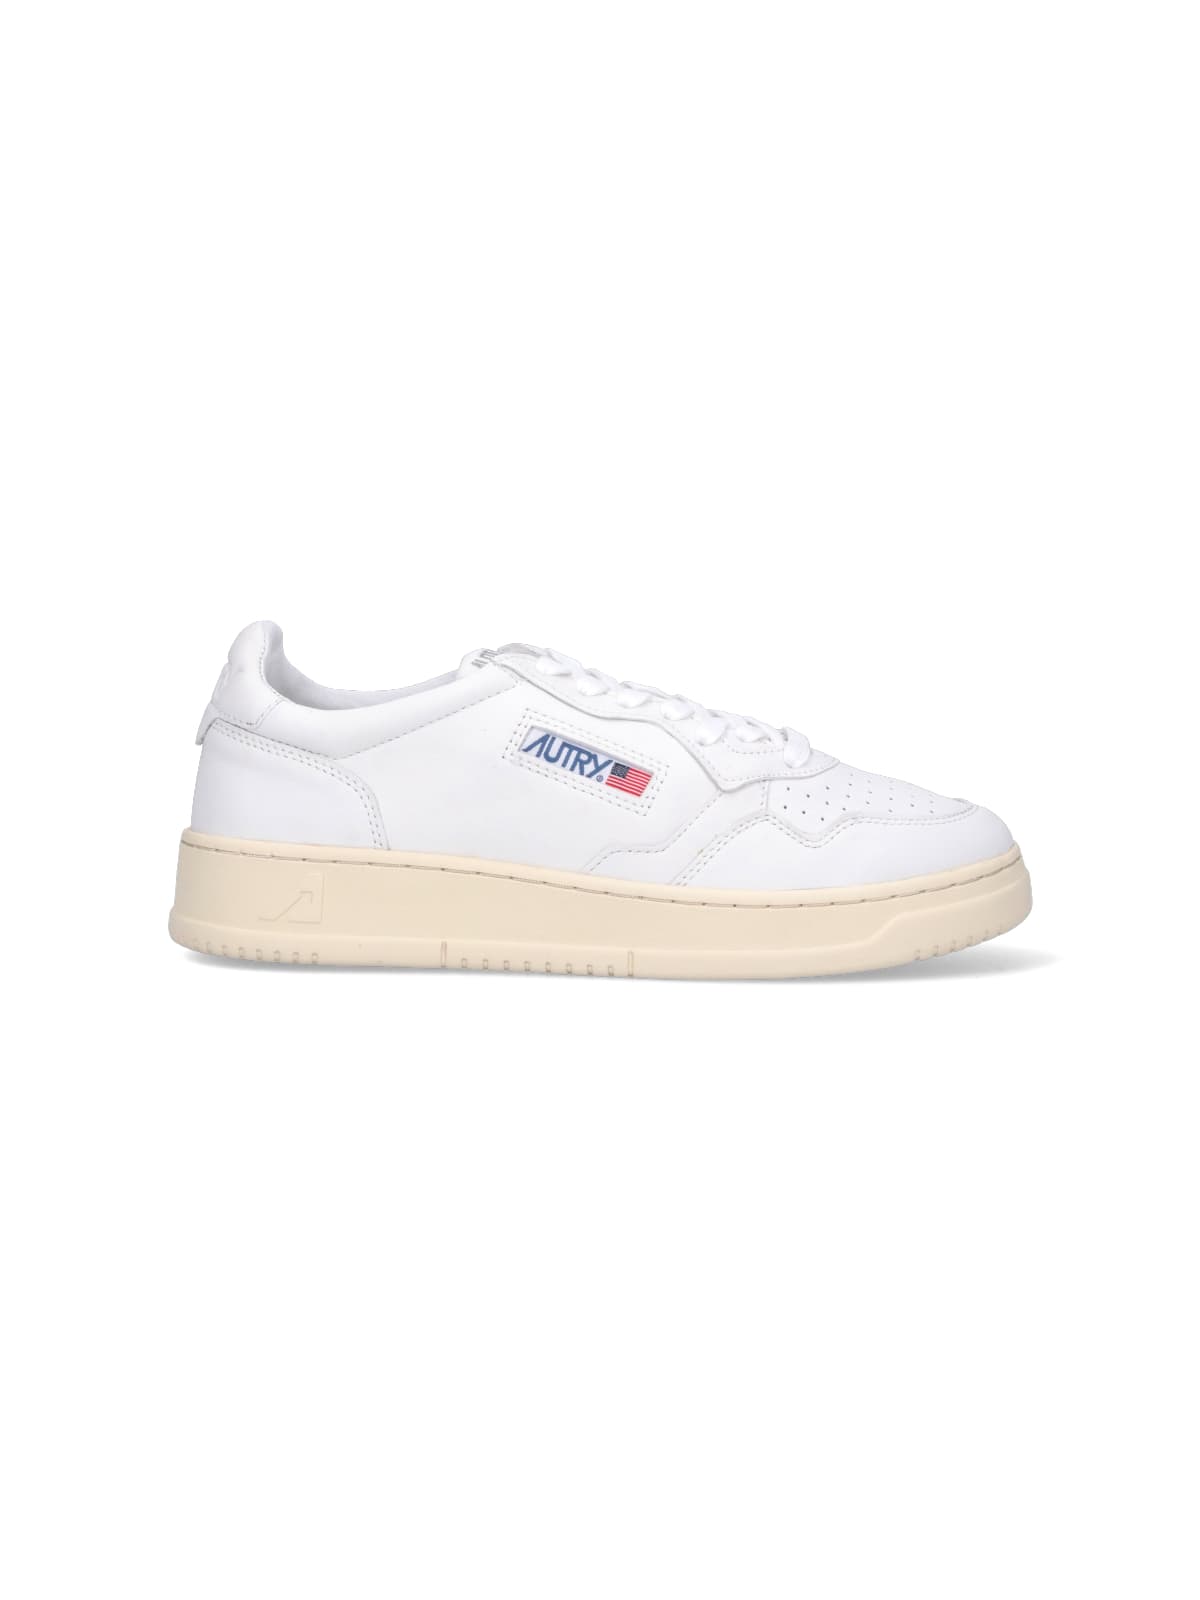 Autry Low Sneakers Medalist In White